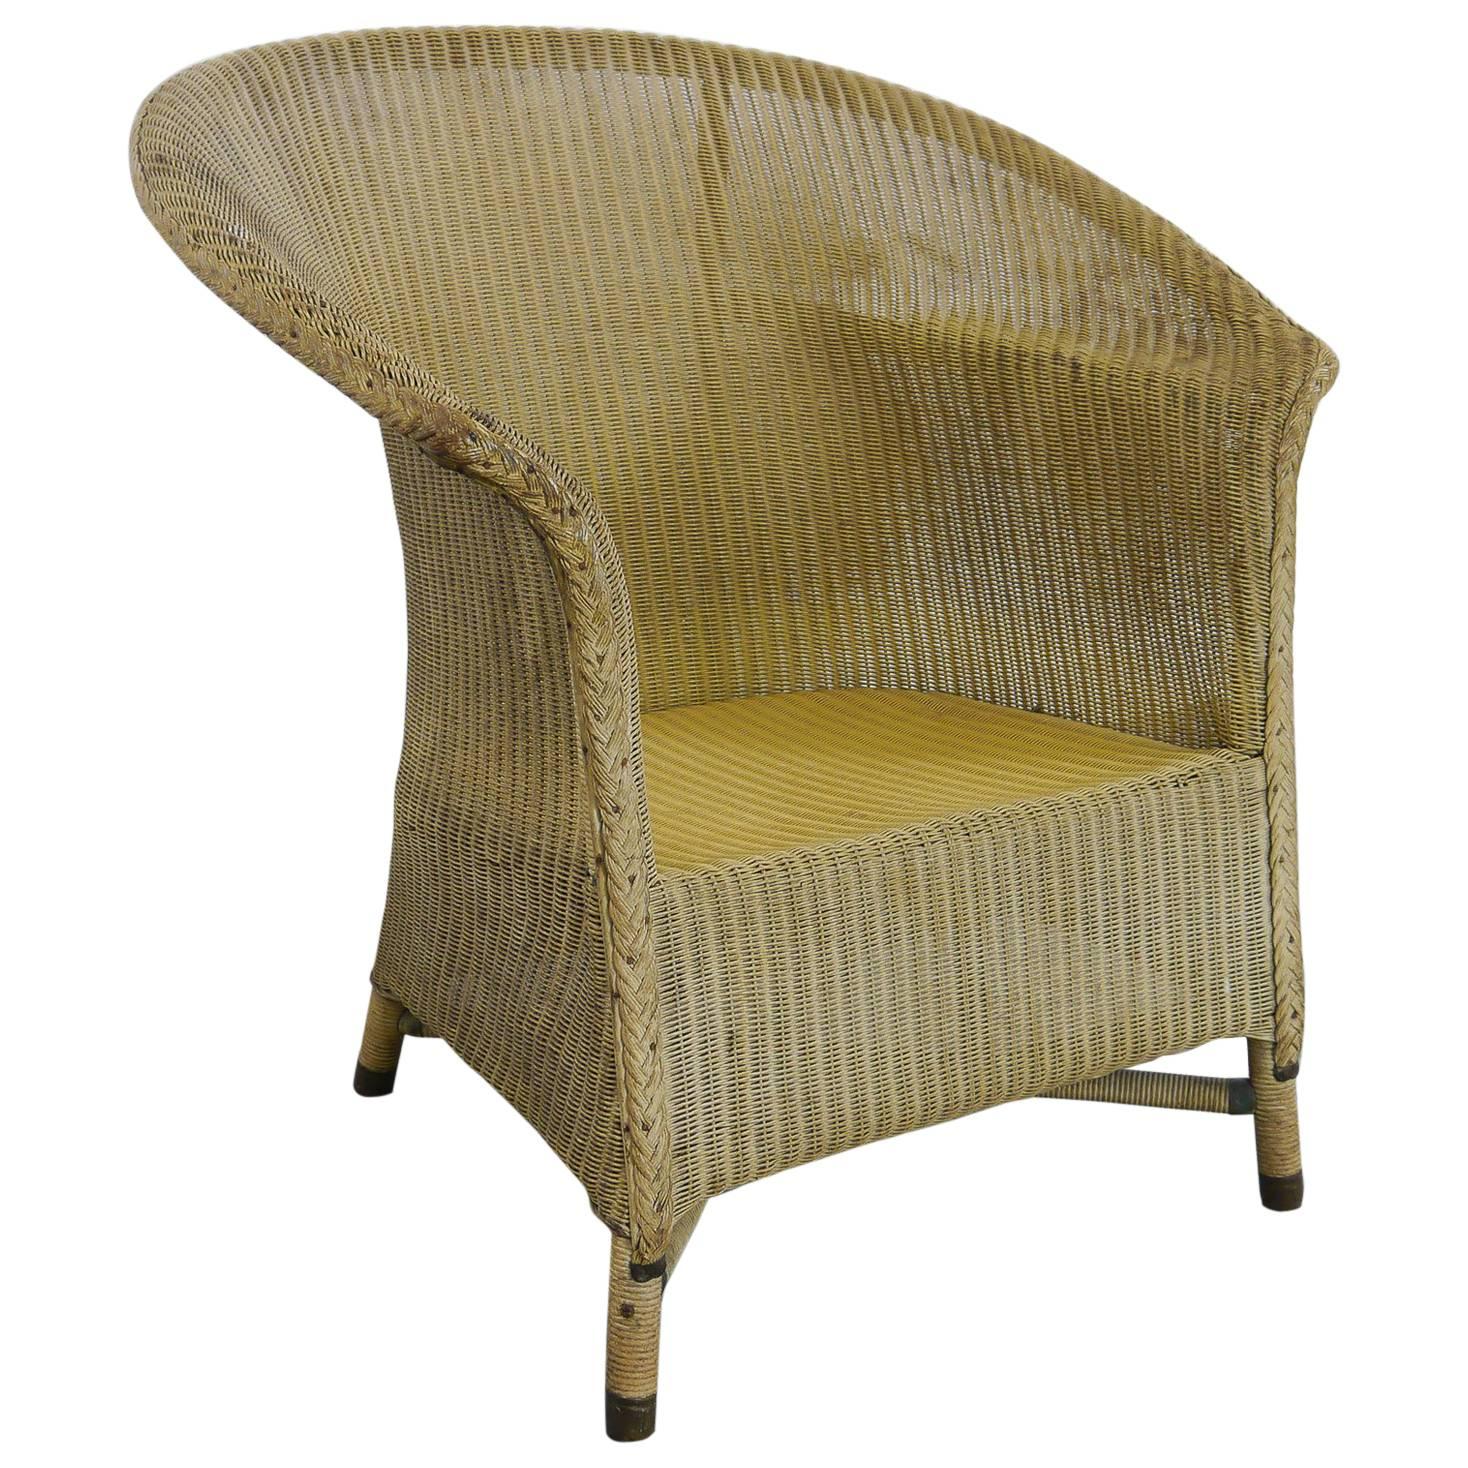 Lustys Lloyd Loom Zeppelin / Airship Chair with Royal Marking, W.Lusty and  Sons For Sale at 1stDibs | lloyd loom chairs, lloyd loom wicker chair, lloyd  loom lusty chair